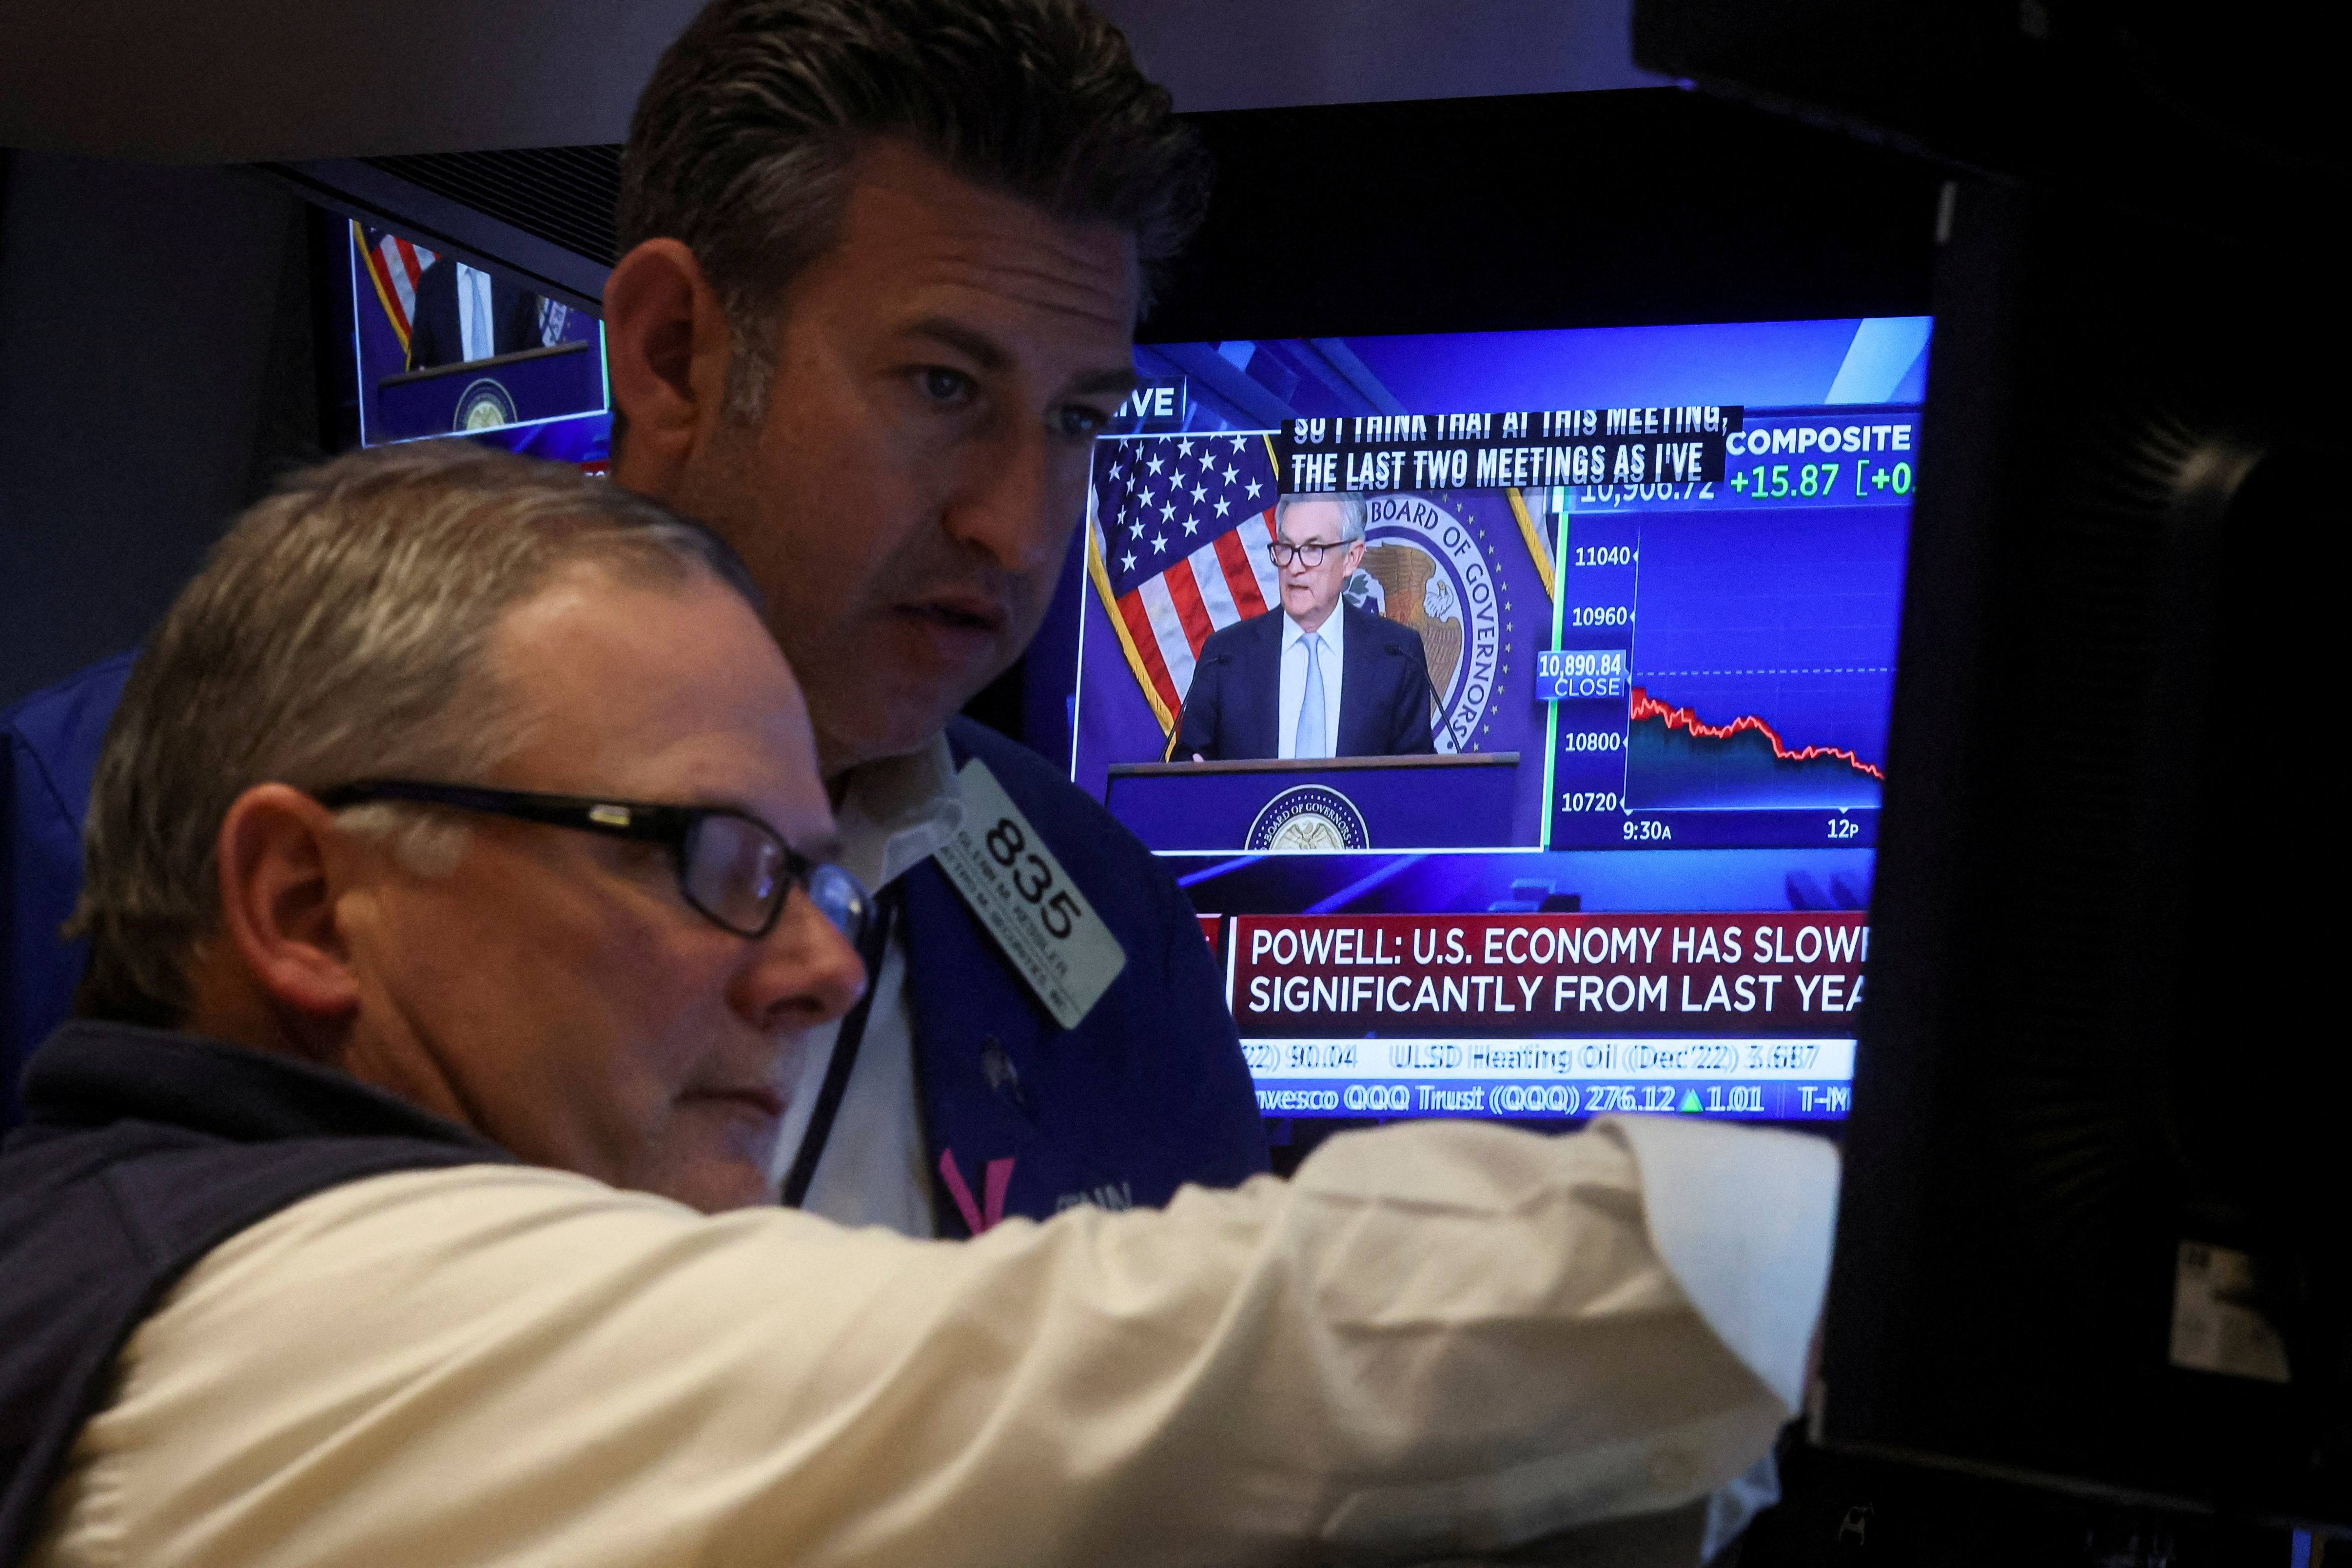 Traders react as Federal Reserve Chair Powell speaks on a screen on the floor of the NYSE in New York